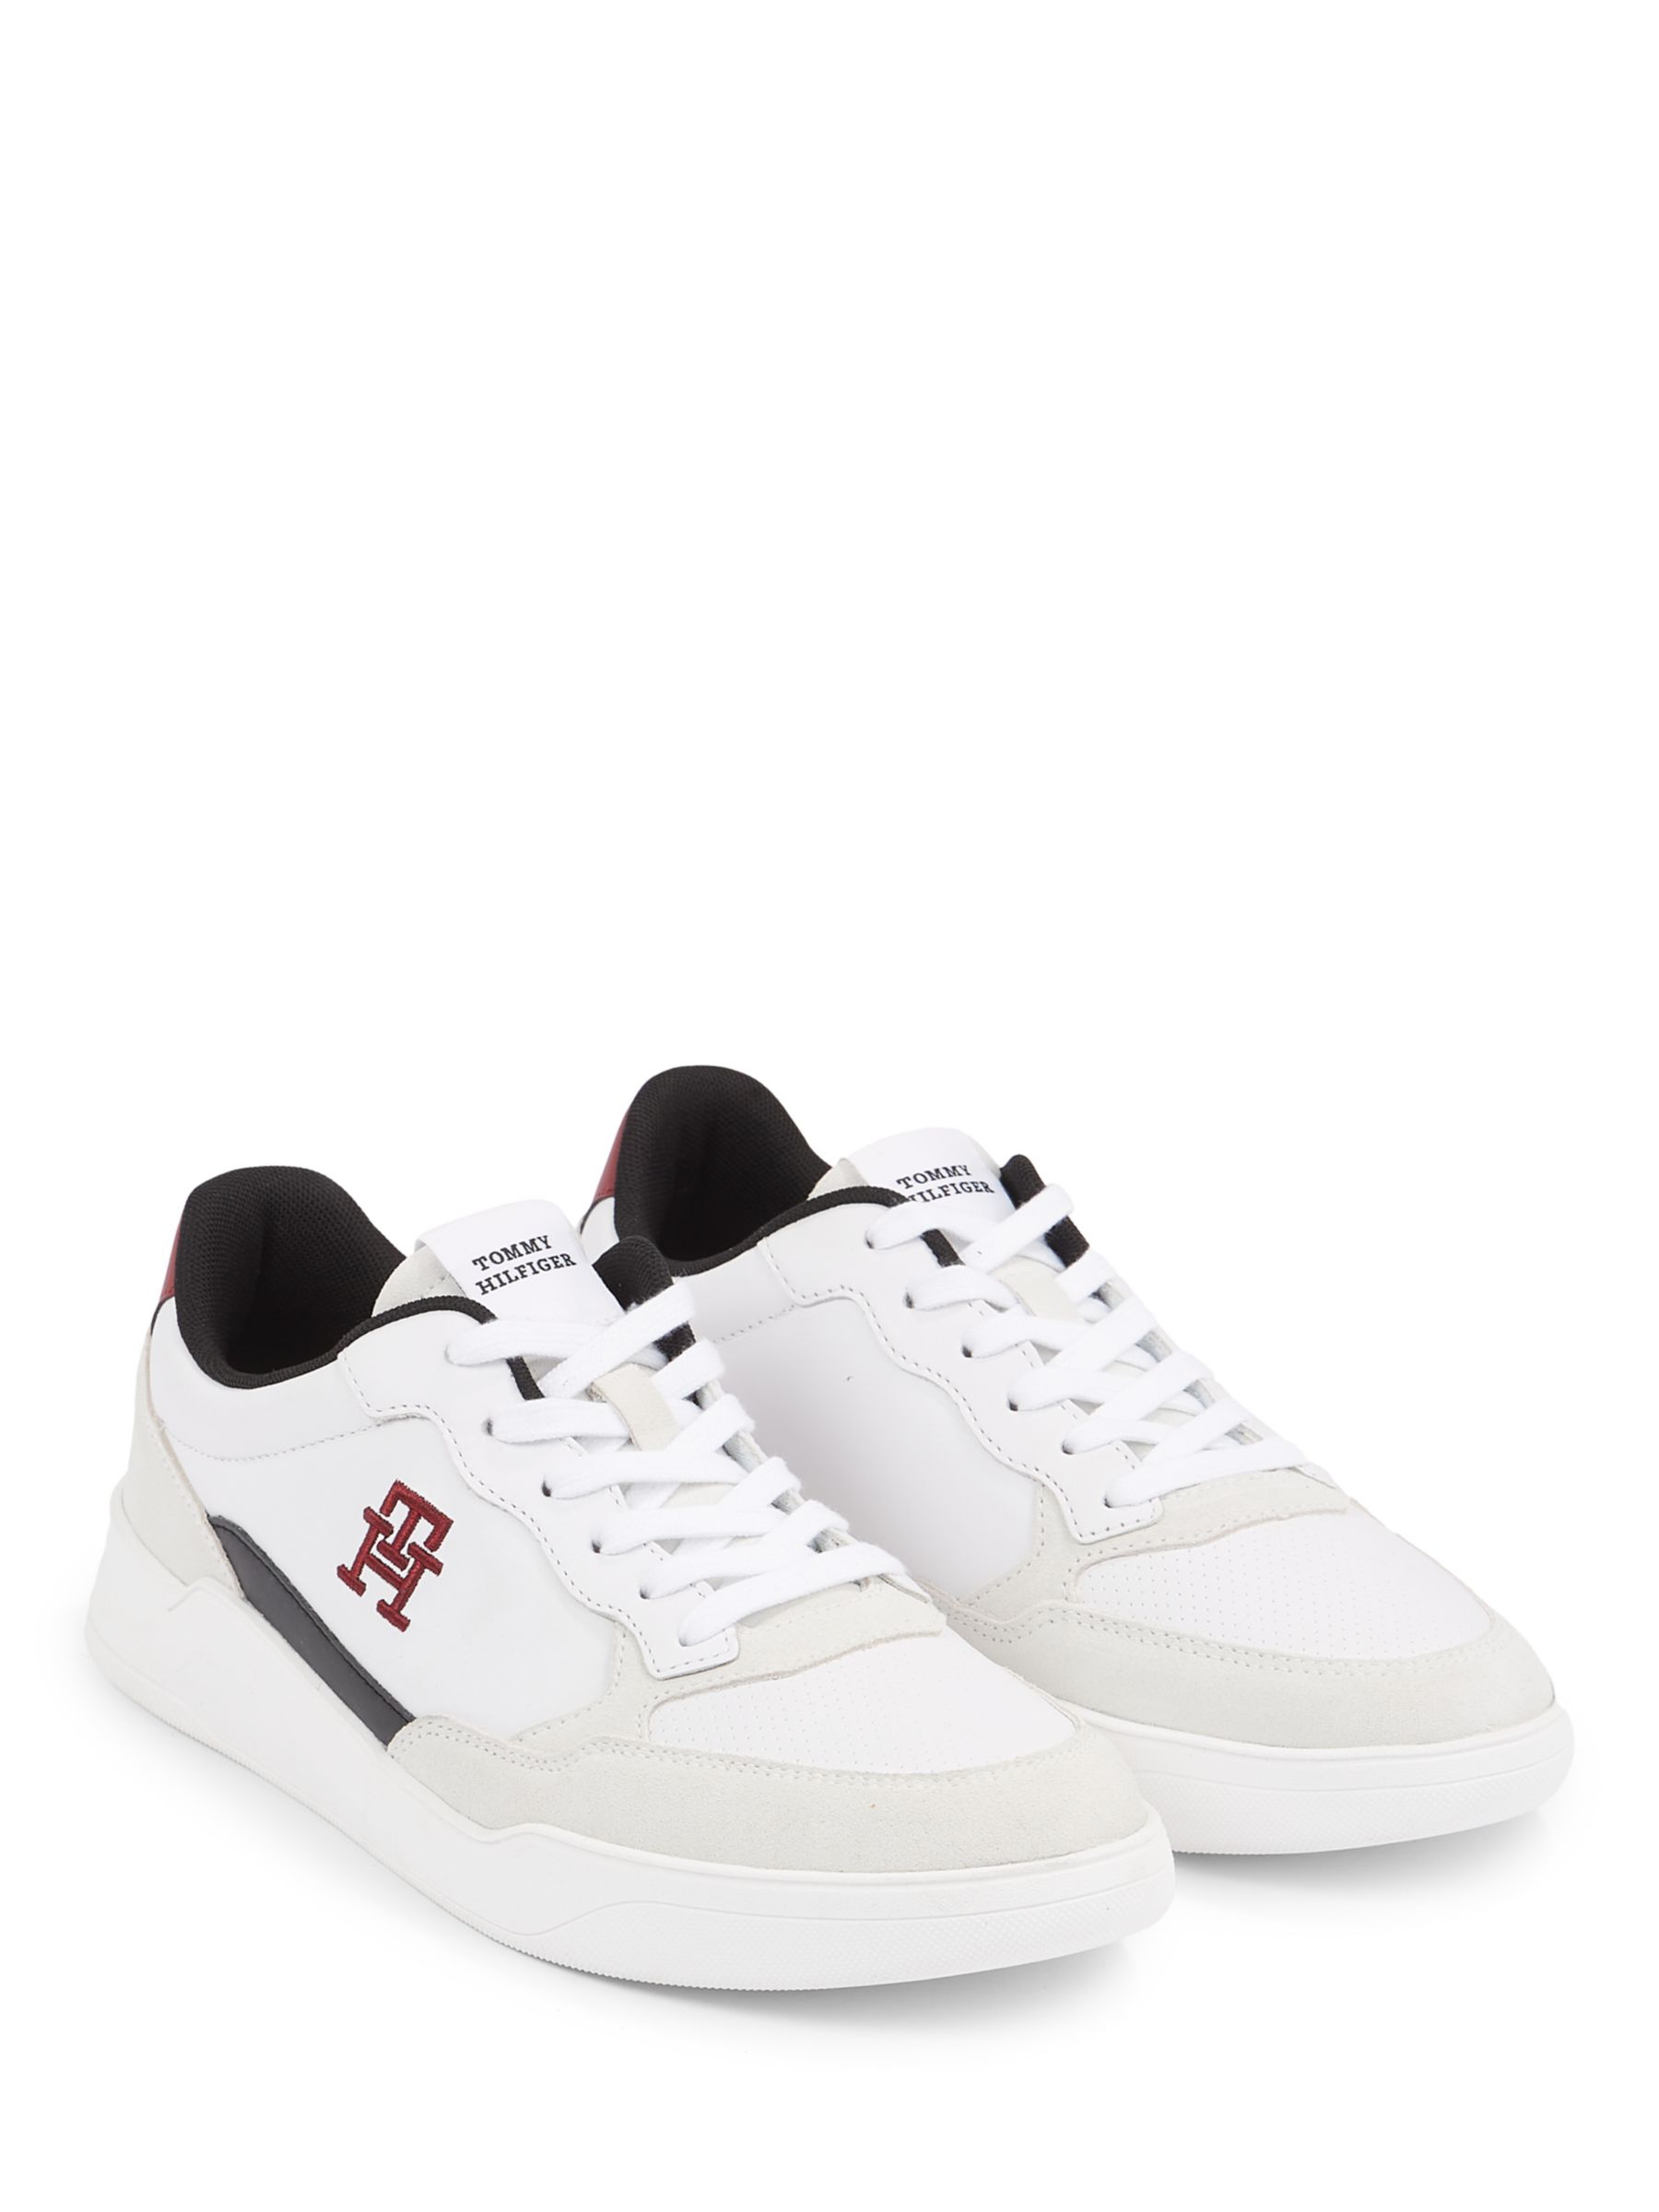 Buy Tommy Hilfiger Elevated Cupsole Leather Trainers, White/Multi Online at johnlewis.com